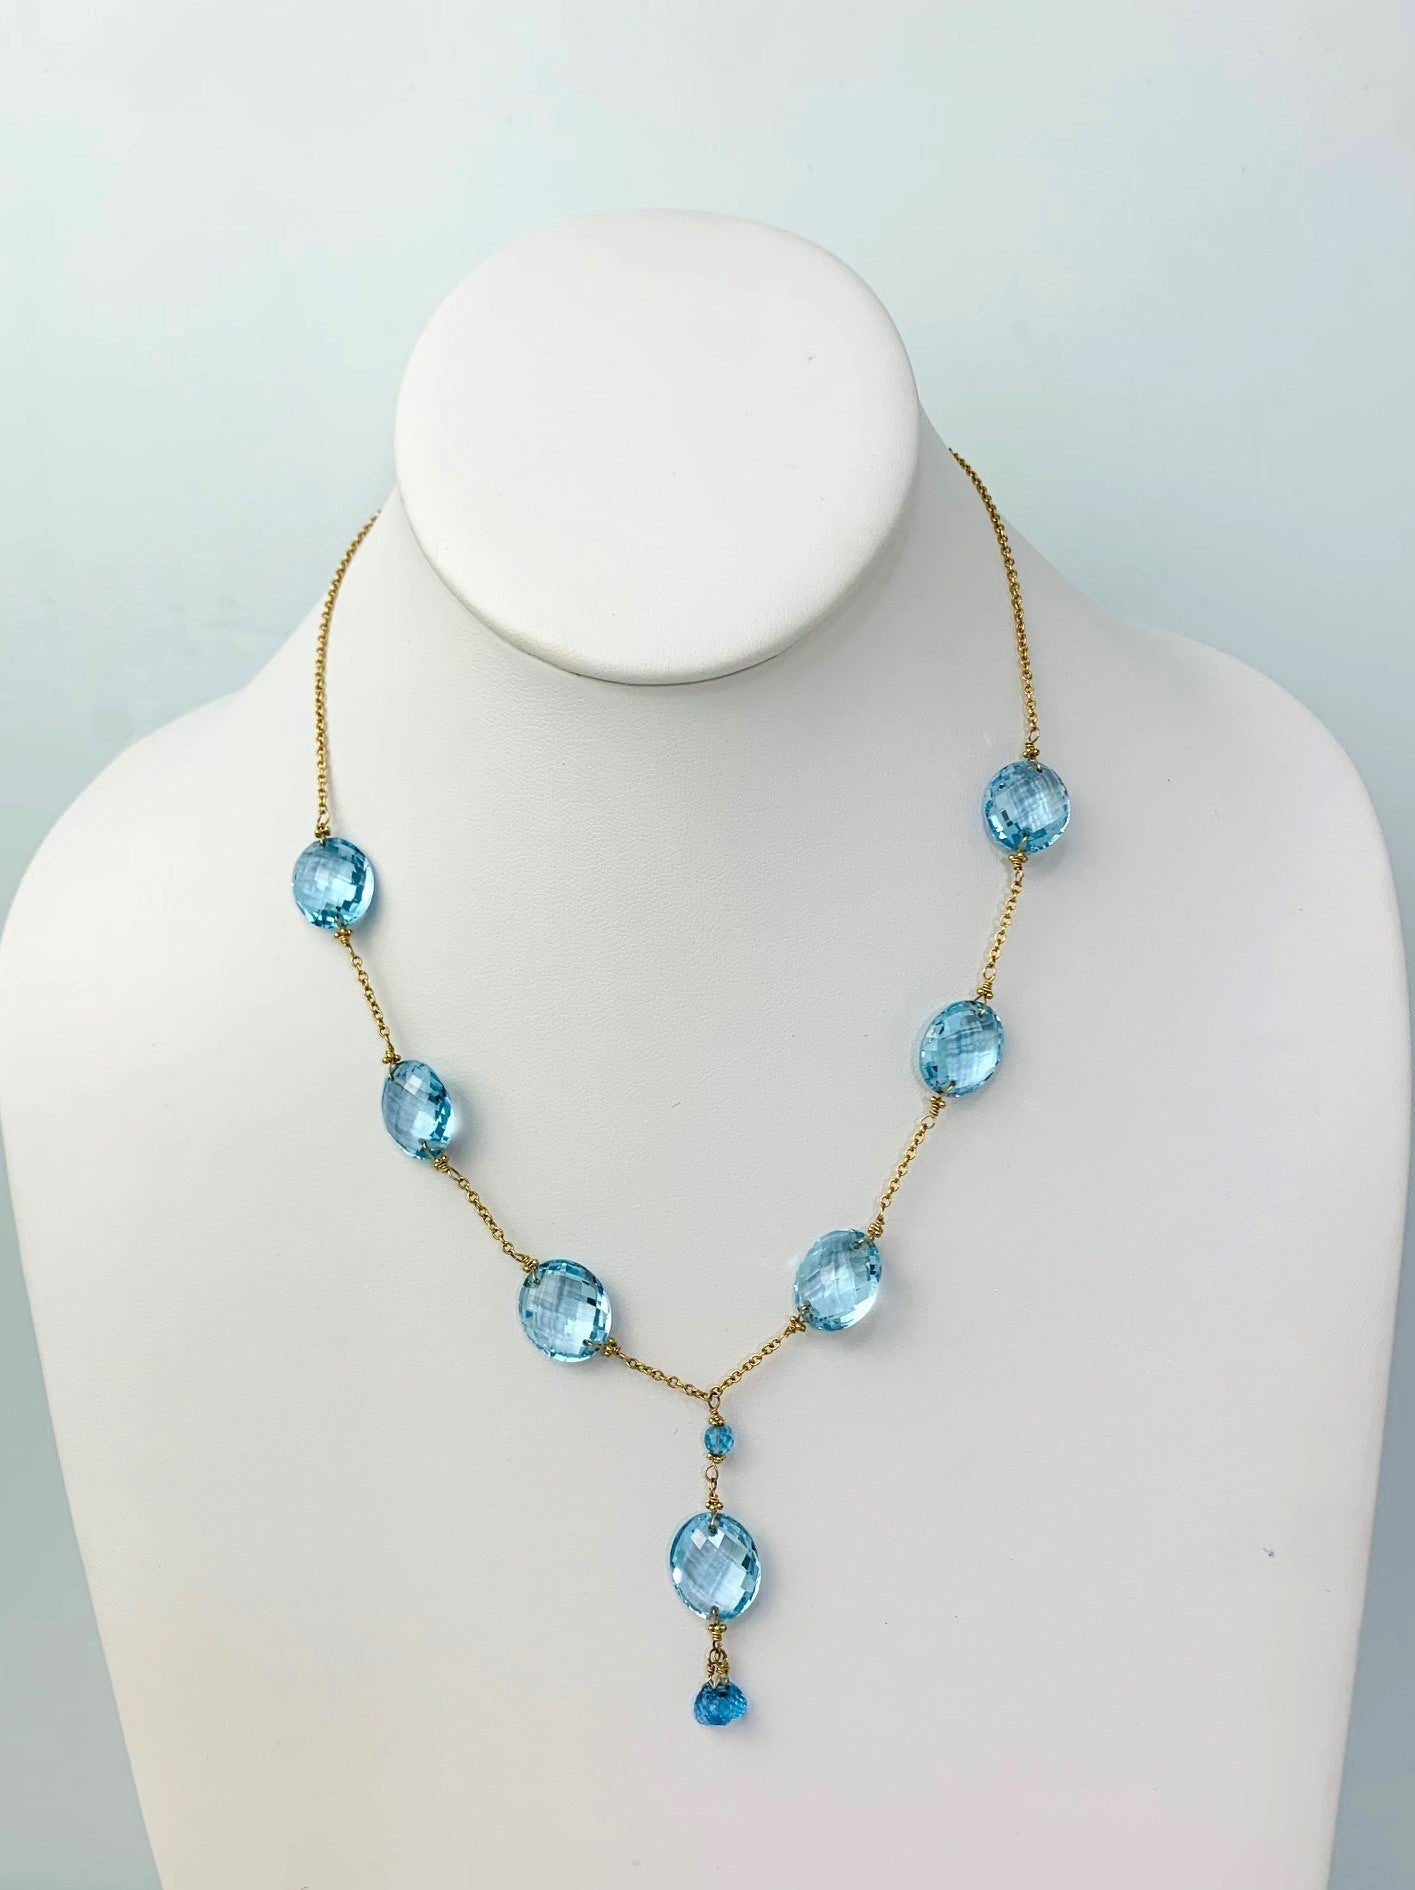 Clearance Sale!- 16-17" Blue Topaz Station Necklace With Oval Checkerboard And 3 Briolette Tassel Drop in 14KY - NCK-376-TASTNCGM14Y-BT-17